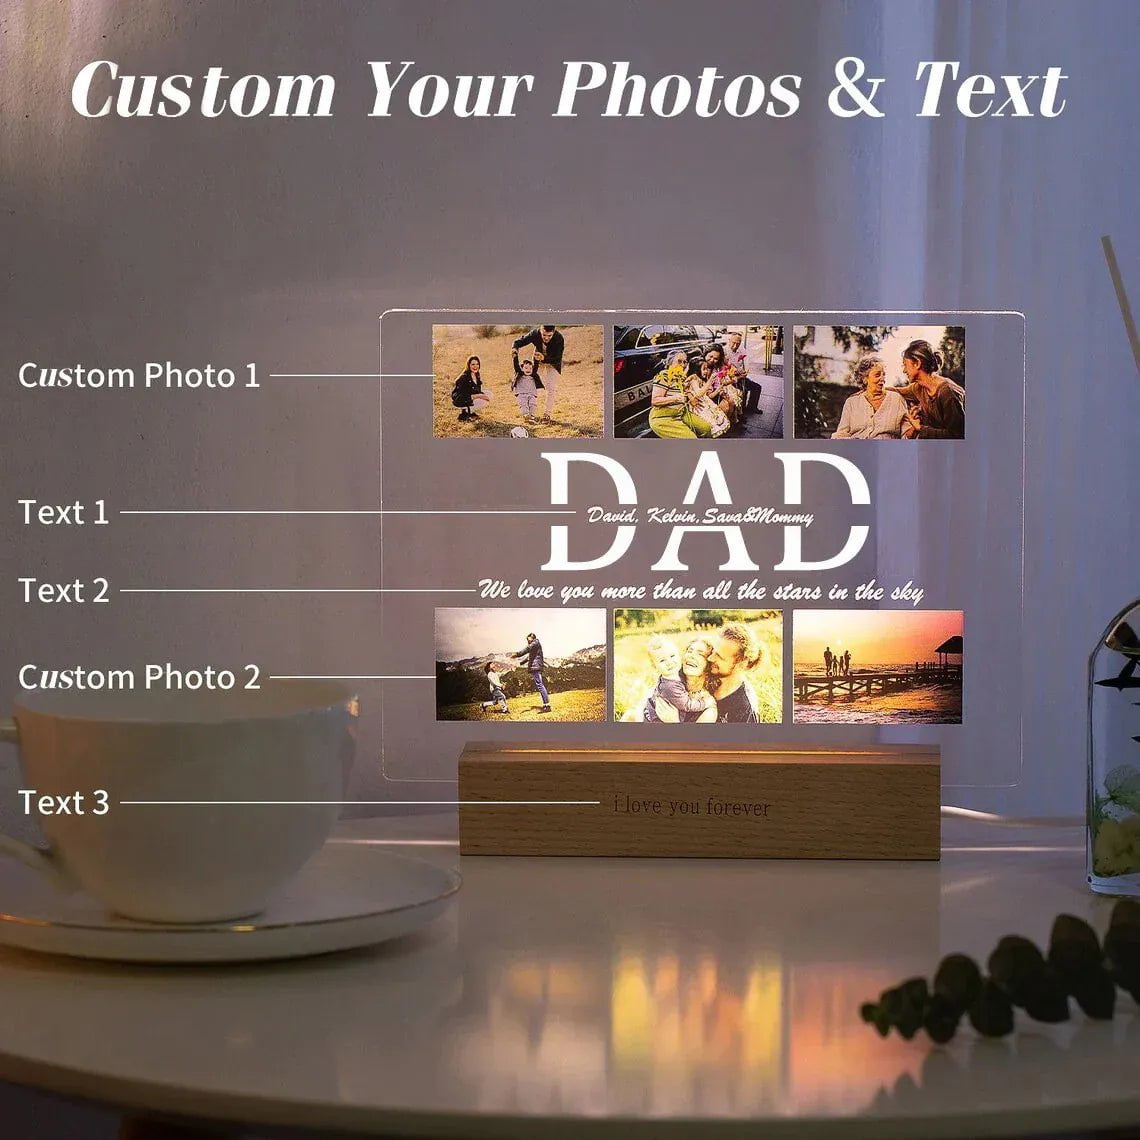 Personalized Acrylic Lamp with Custom Photo and Text - Ideal Bedroom Night Light for MOM DAD LOVE Friend Family Day Wedding Birthday Gift Present